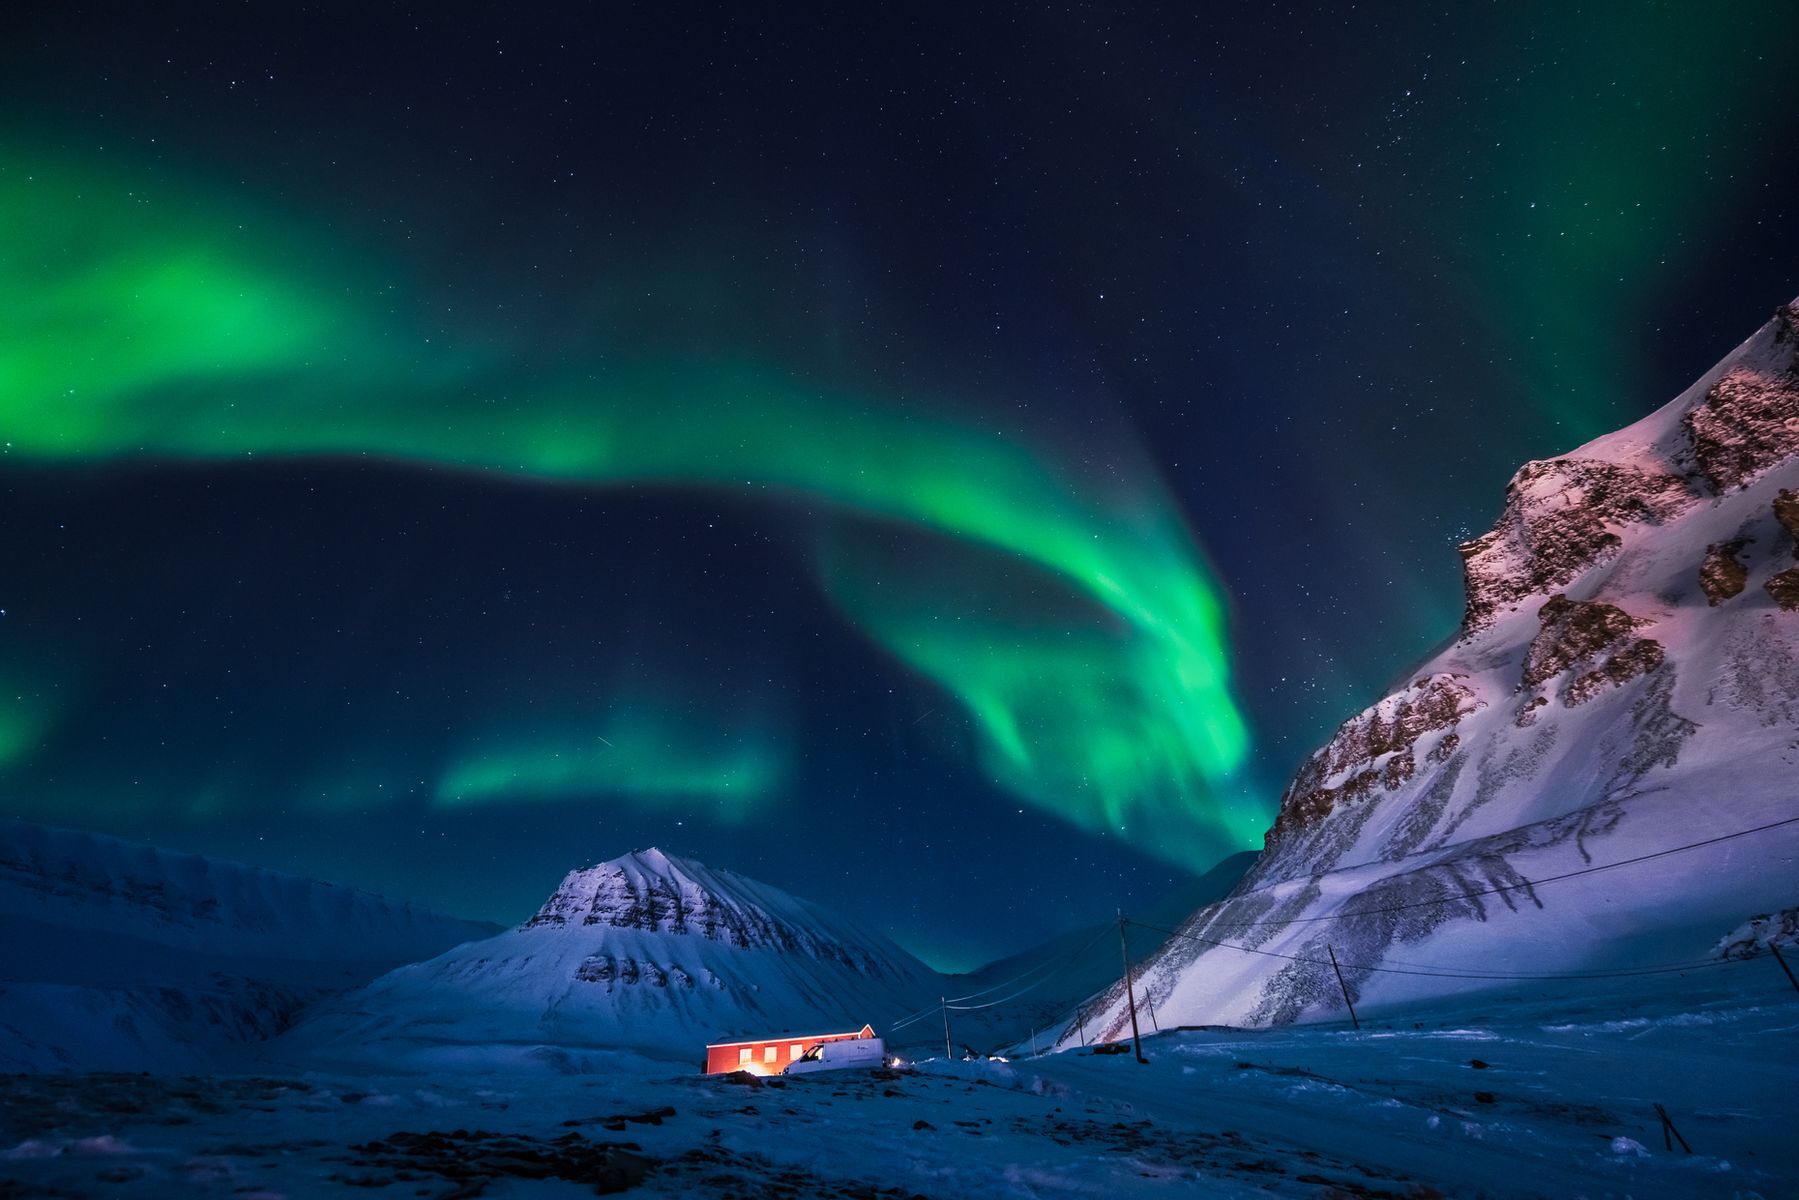 Nature lovers will definitely want to add <a href="https://www.visitnorway.com/places-to-go/svalbard-islands/?lang=usa" rel="noreferrer noopener">Svalbard</a> to their Norwegian itinerary. It’s not only a fabulous destination for viewing the northern lights, it’s also a prime spot for observing wildlife. Located between Norway and the North Pole, this archipelago features a large population of polar bears, numerous frozen caves, and majestic glaciers visitors can explore by boat.